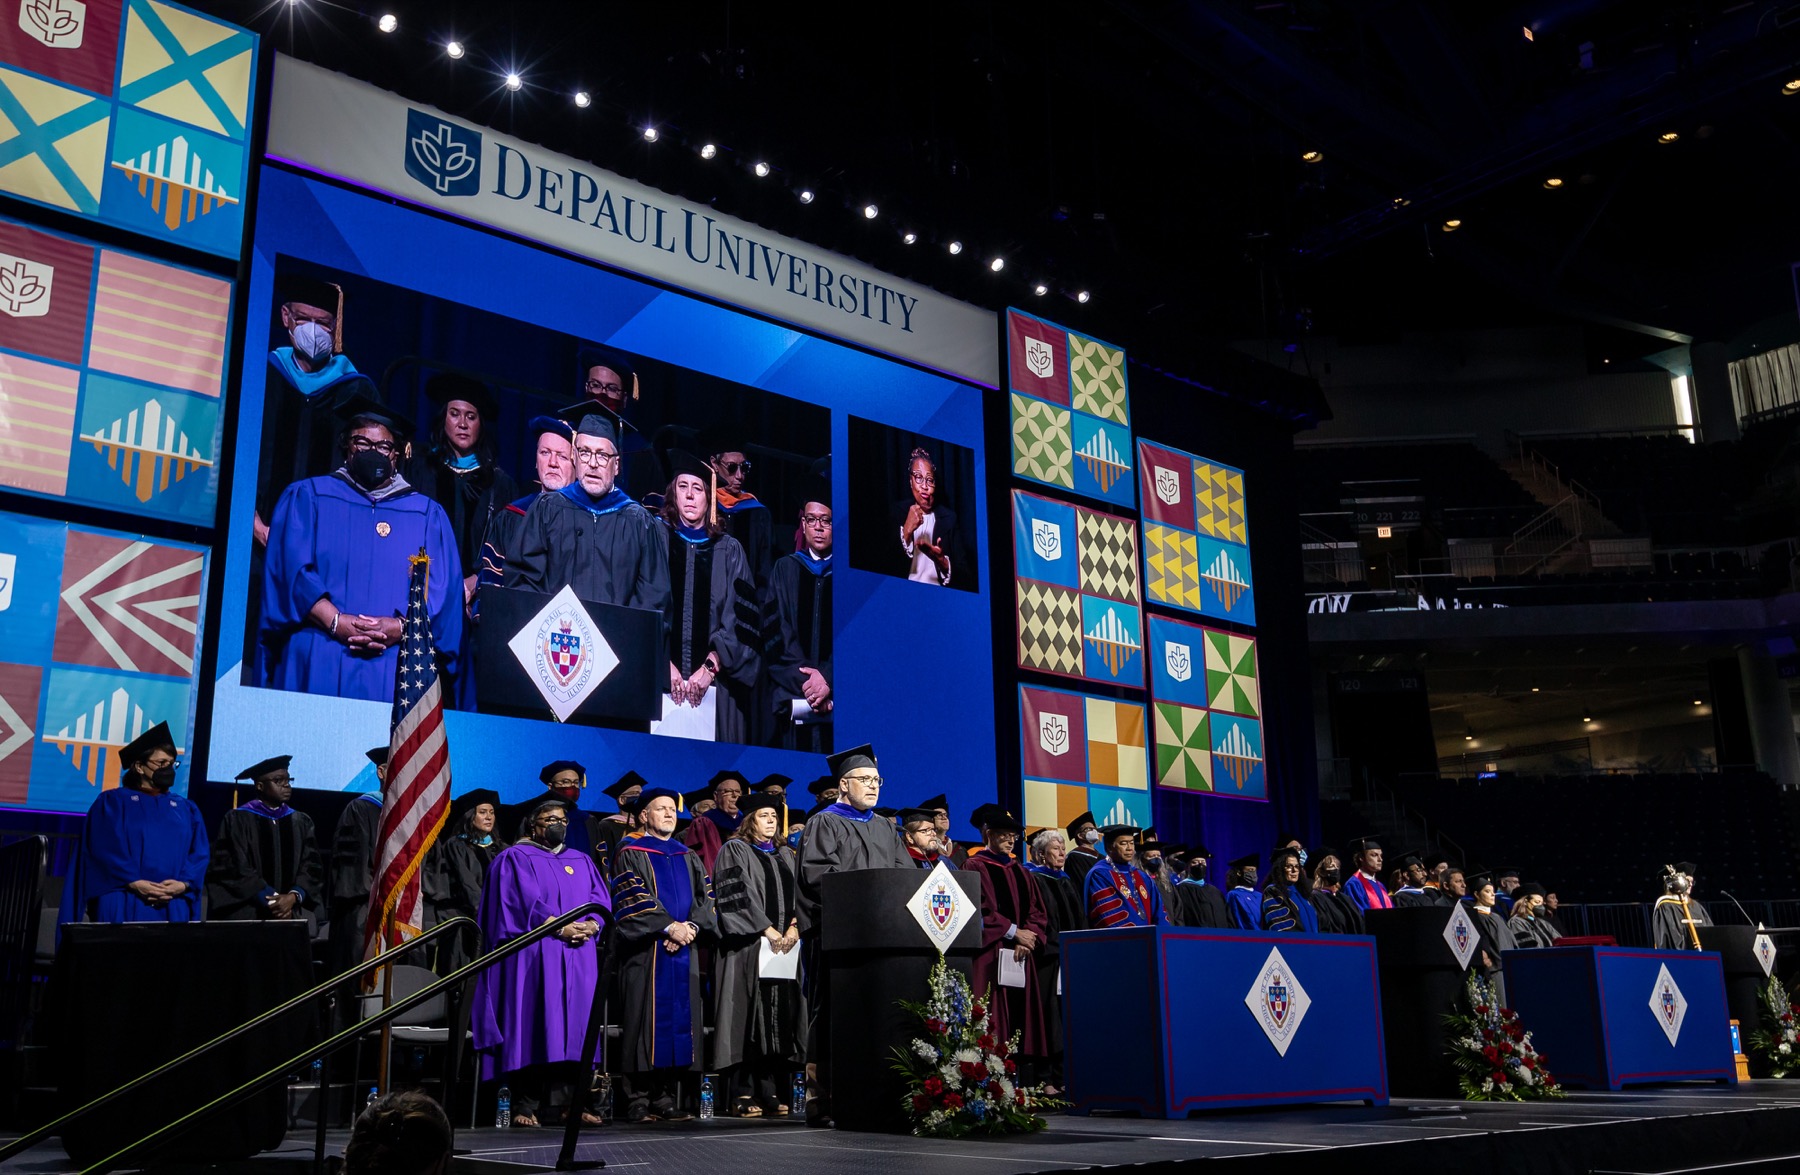 DePaul faculty and administration processed onto the stage to begin the first of six commencement ceremonies held over the weekend.